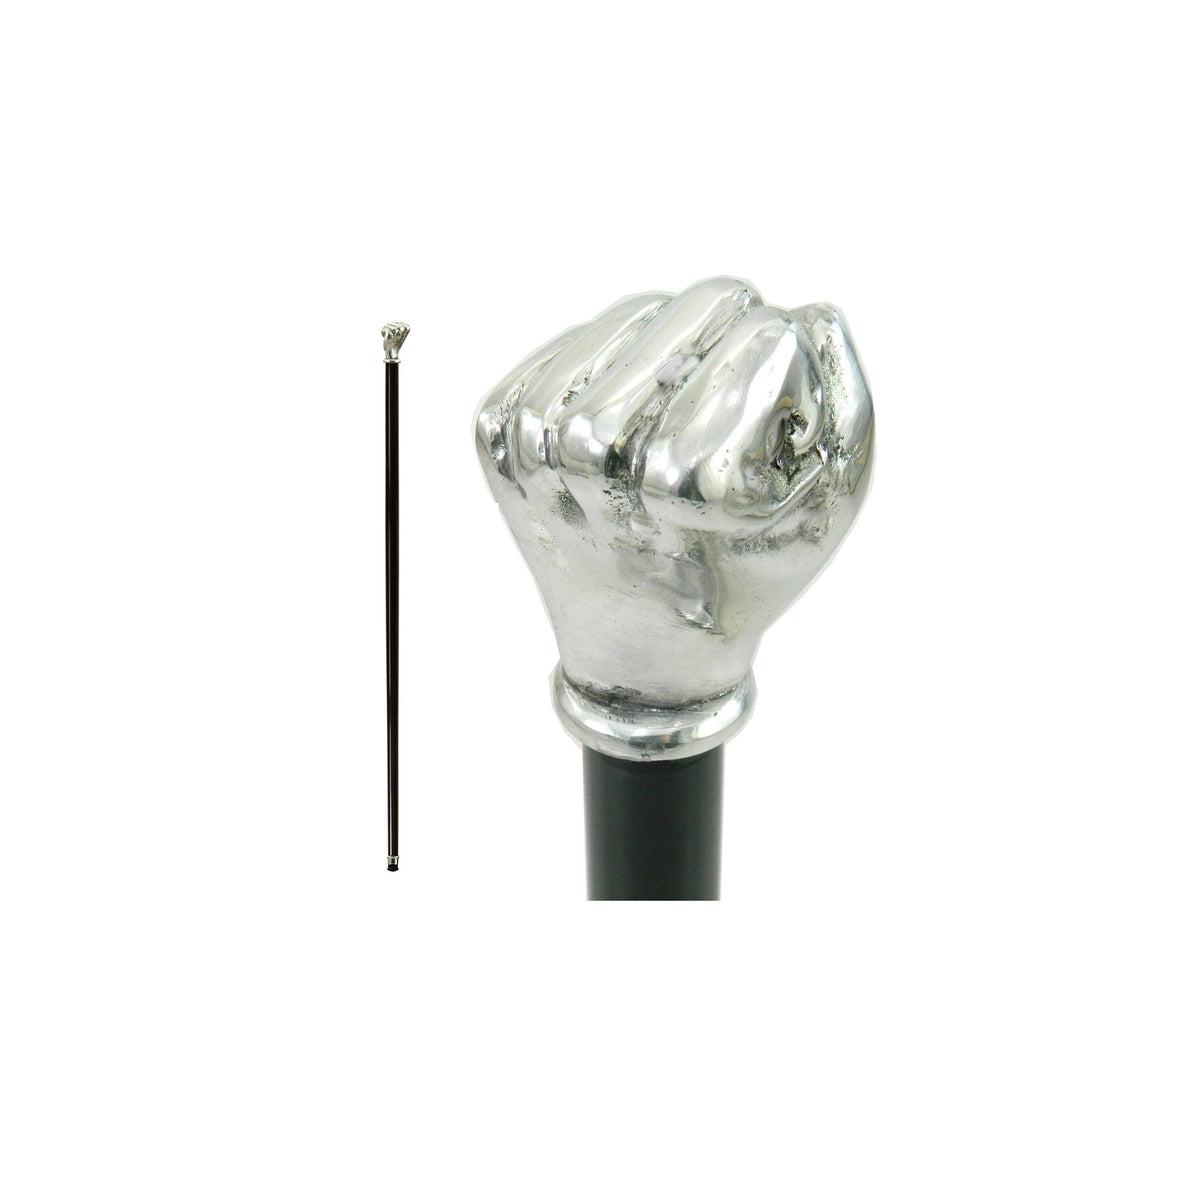 Solid Pewter Custom Made Fist Head Knob Cane or Walking Stick